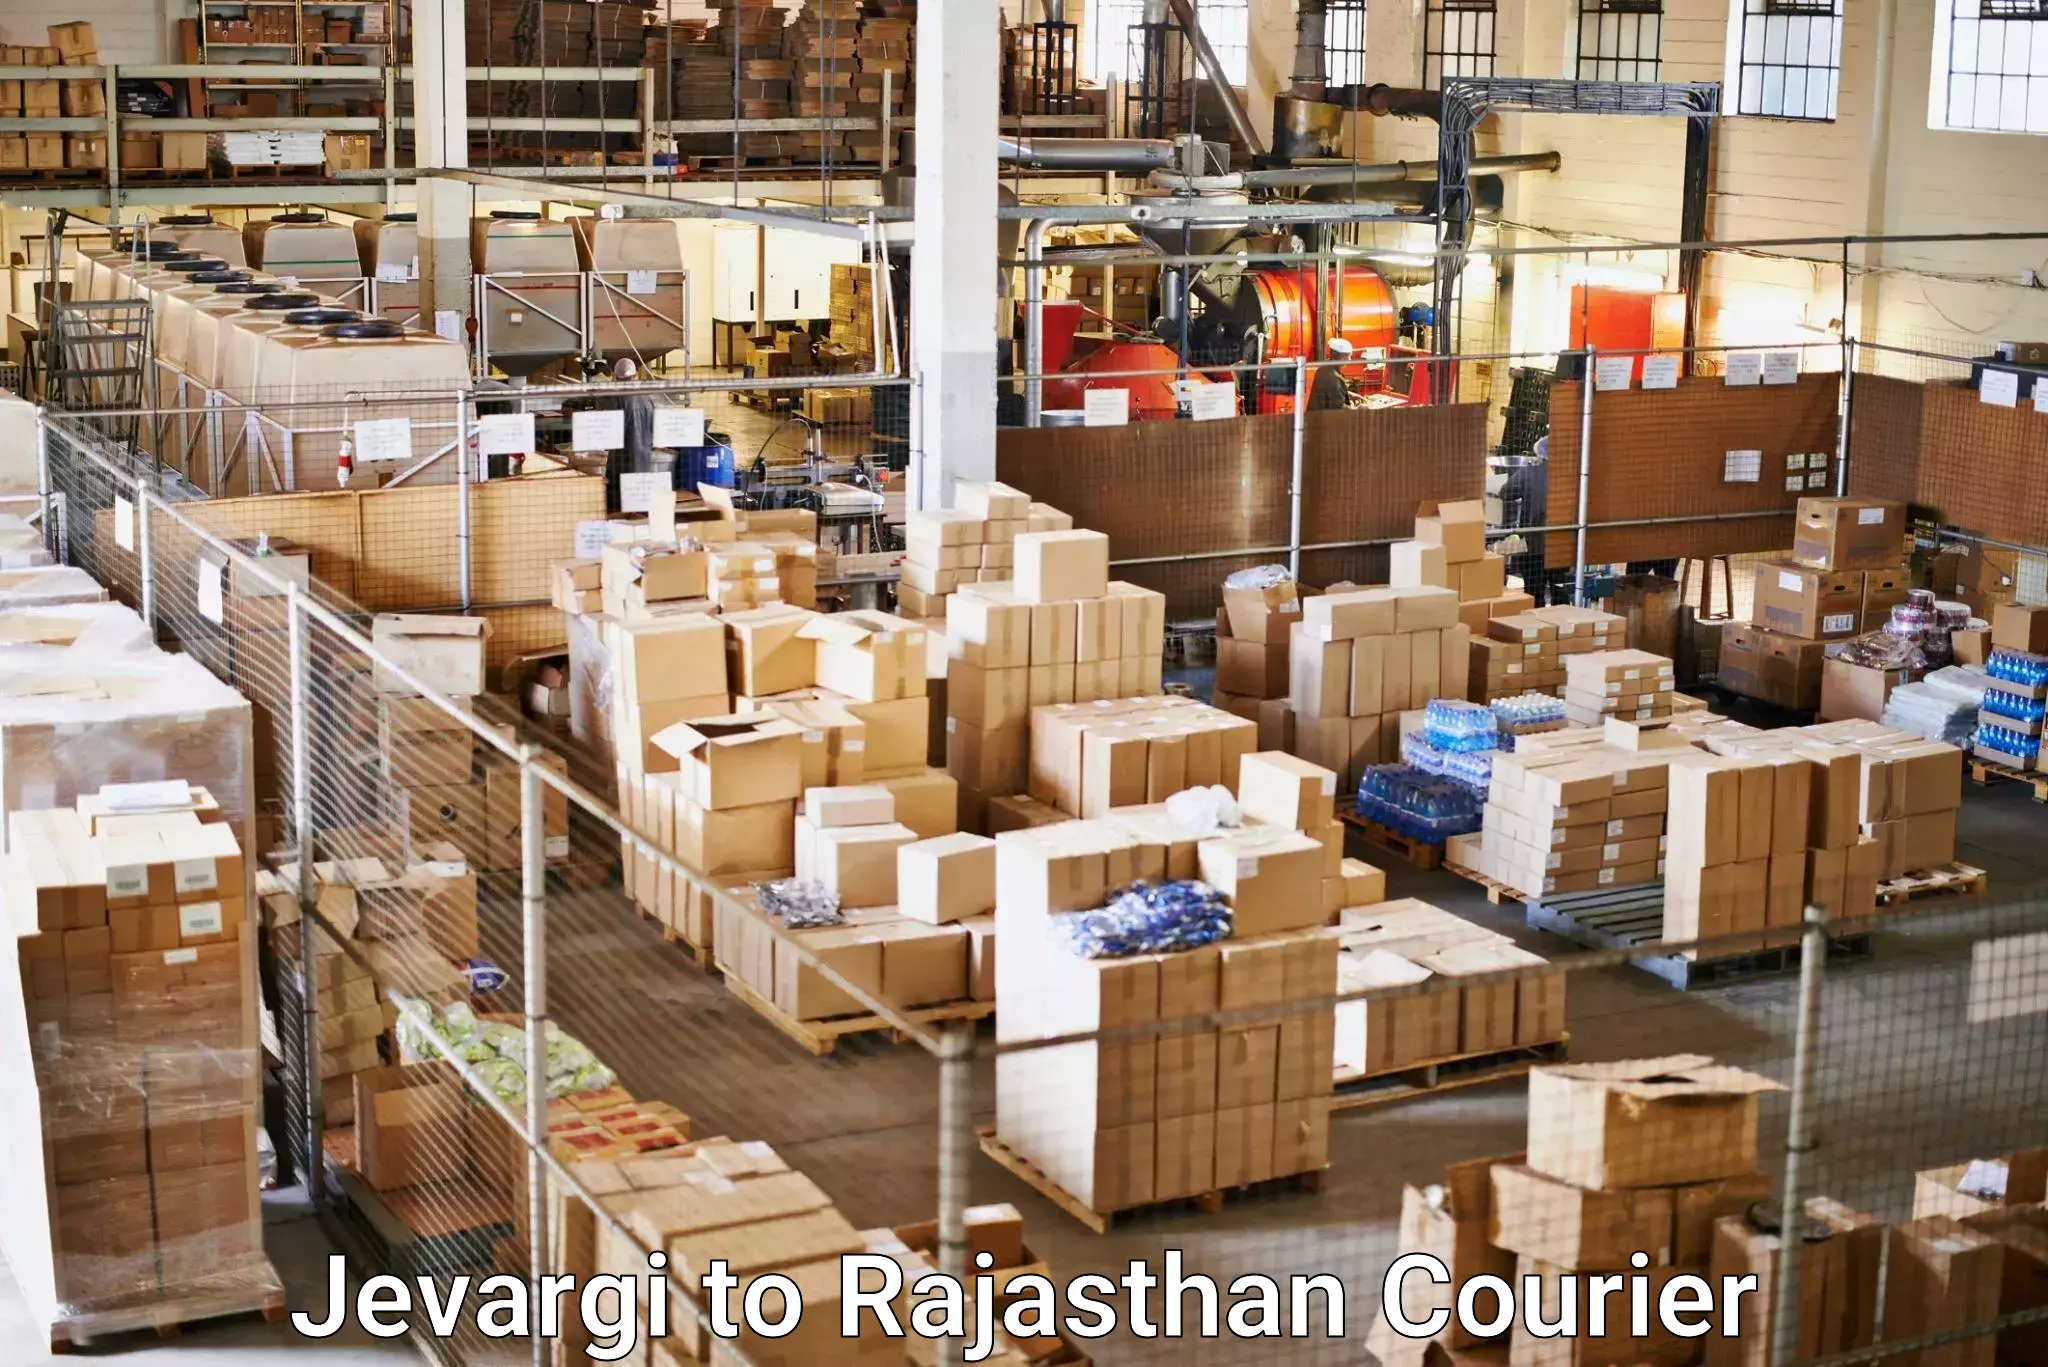 Courier service booking in Jevargi to Rajasthan